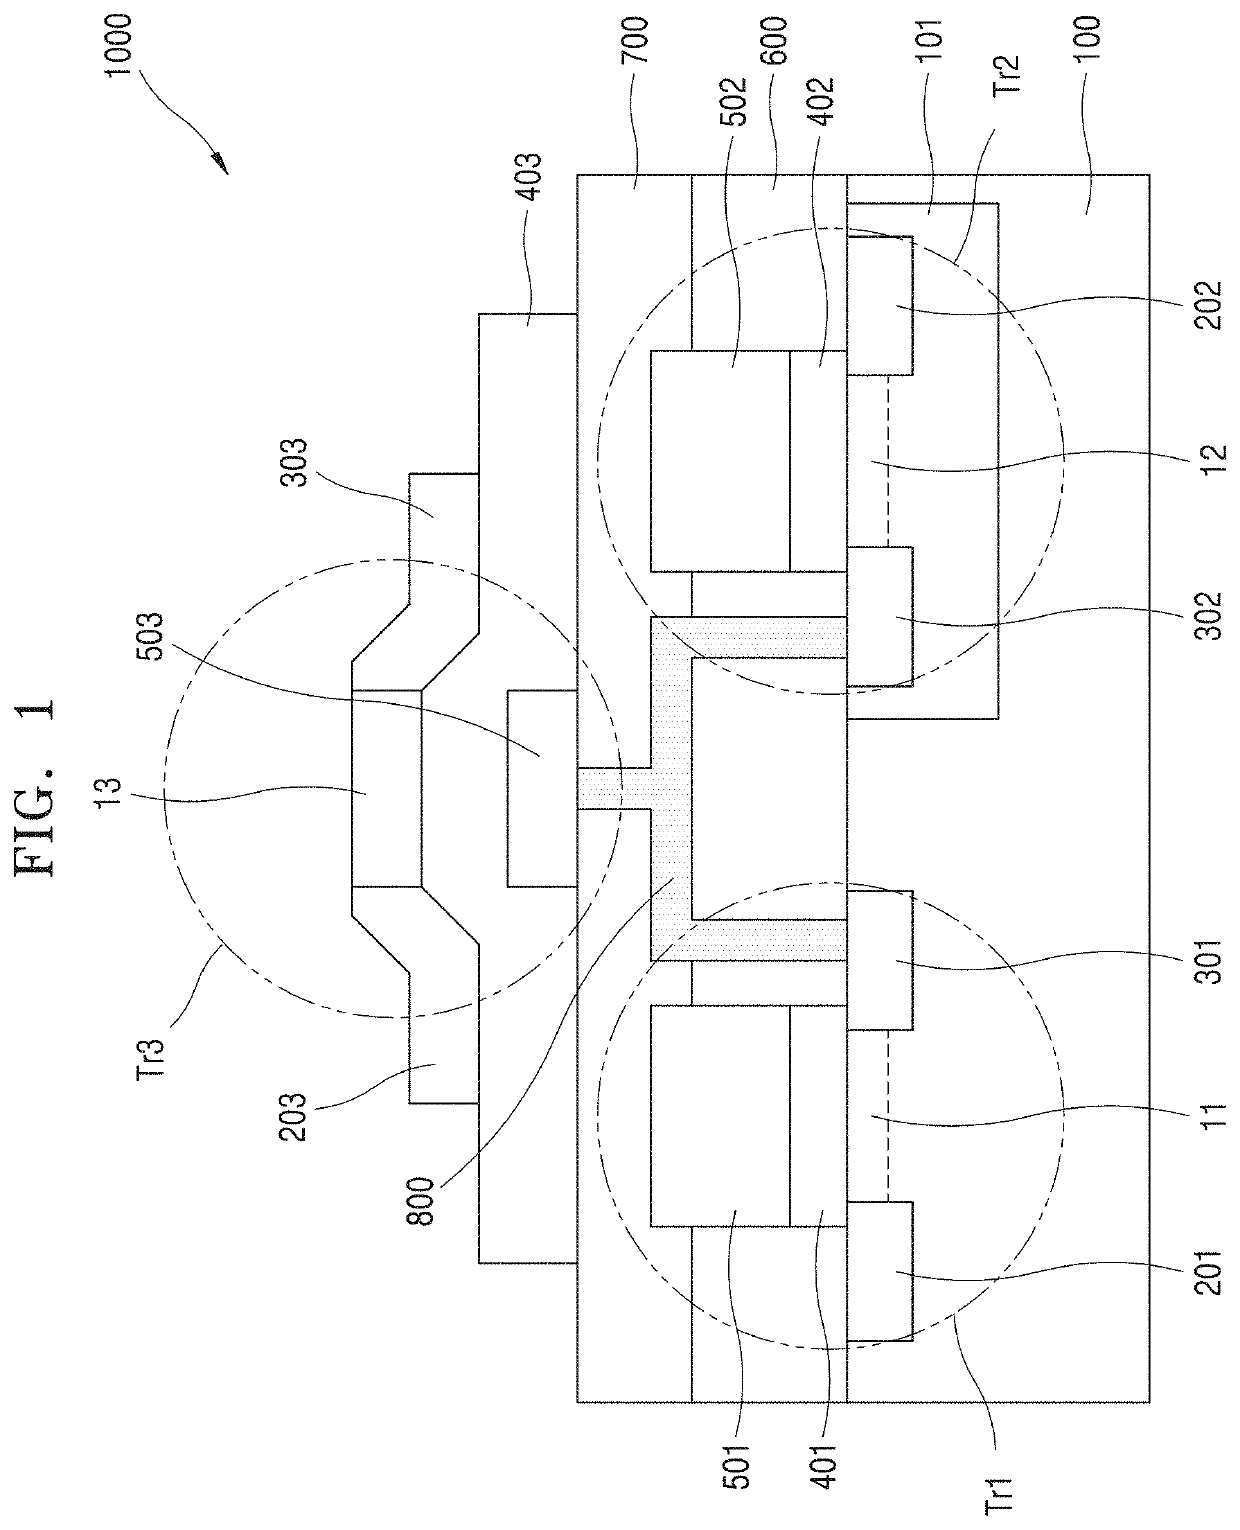 Semiconductor device including ferroelectric material, neuromorphic circuit including the semiconductor device, and neuromorphic computing apparatus including the neuromorphic circuit